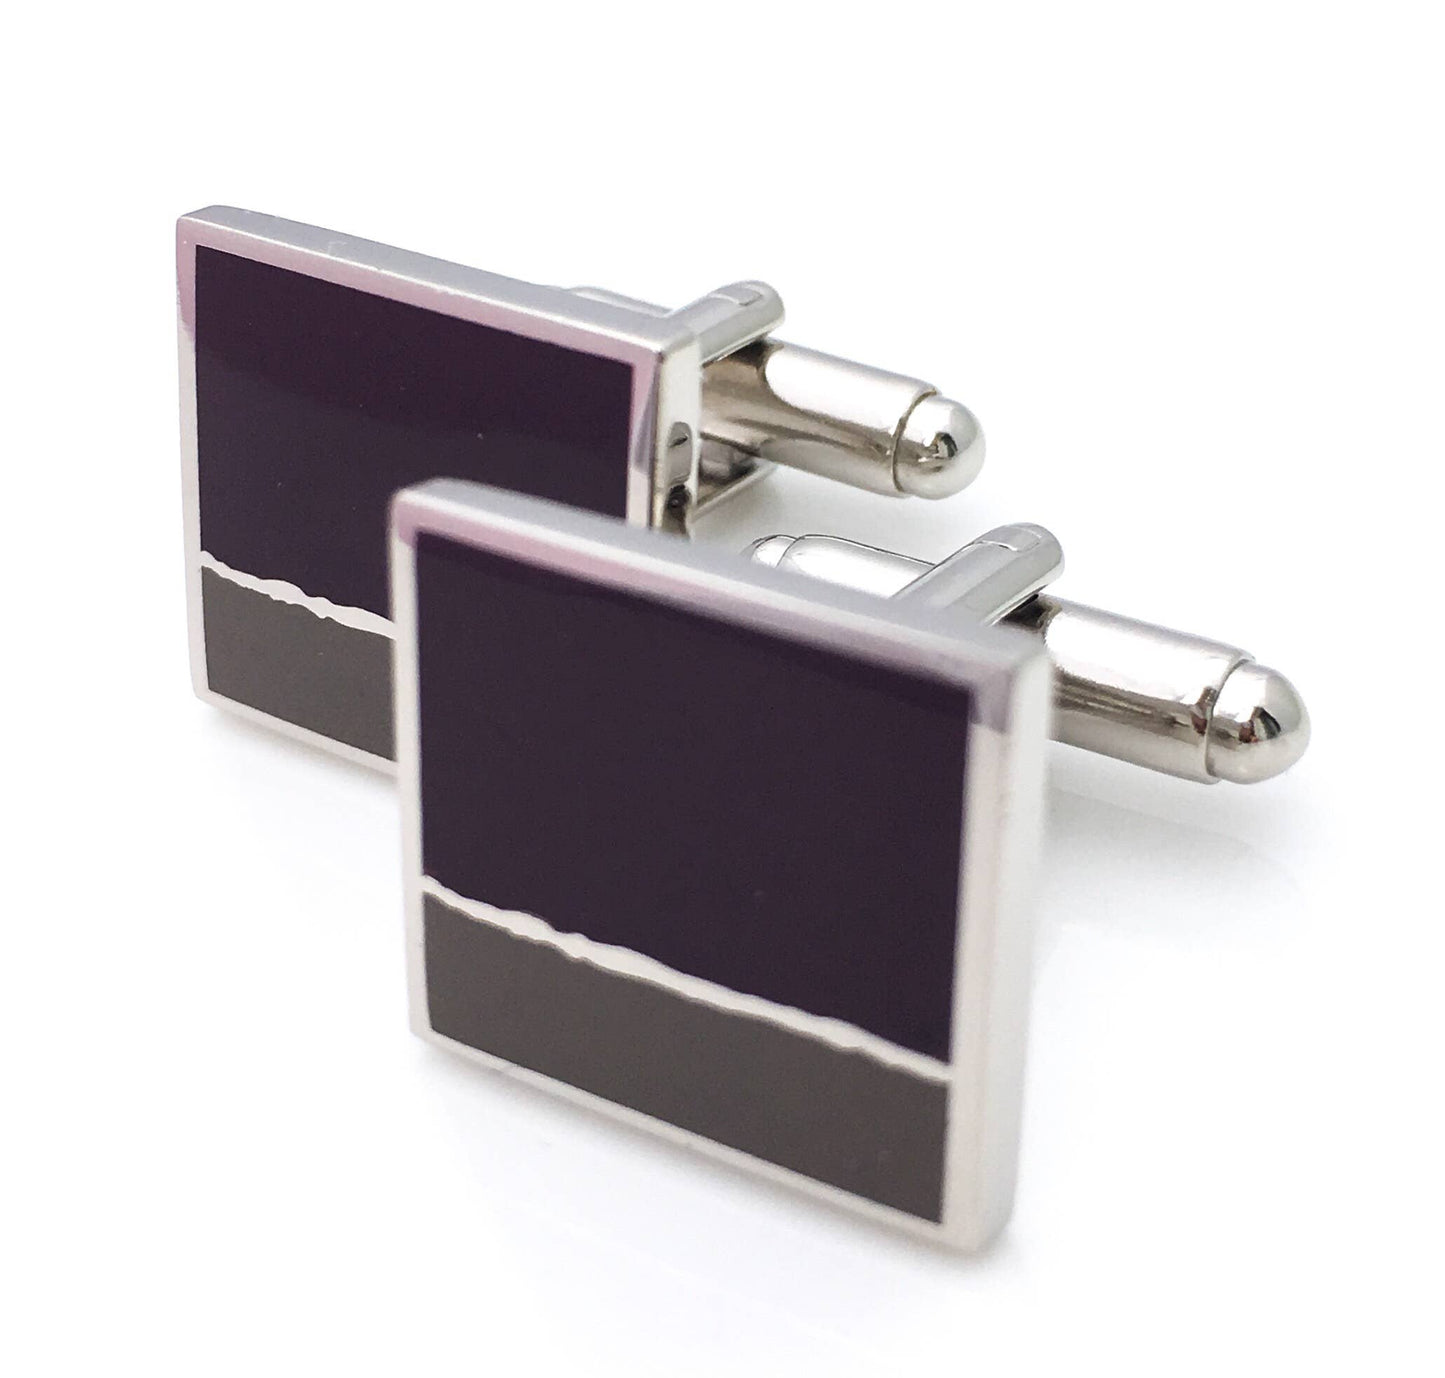 Enamel cufflinks with square in taupe enamel and smaller rectangle in lighter shade